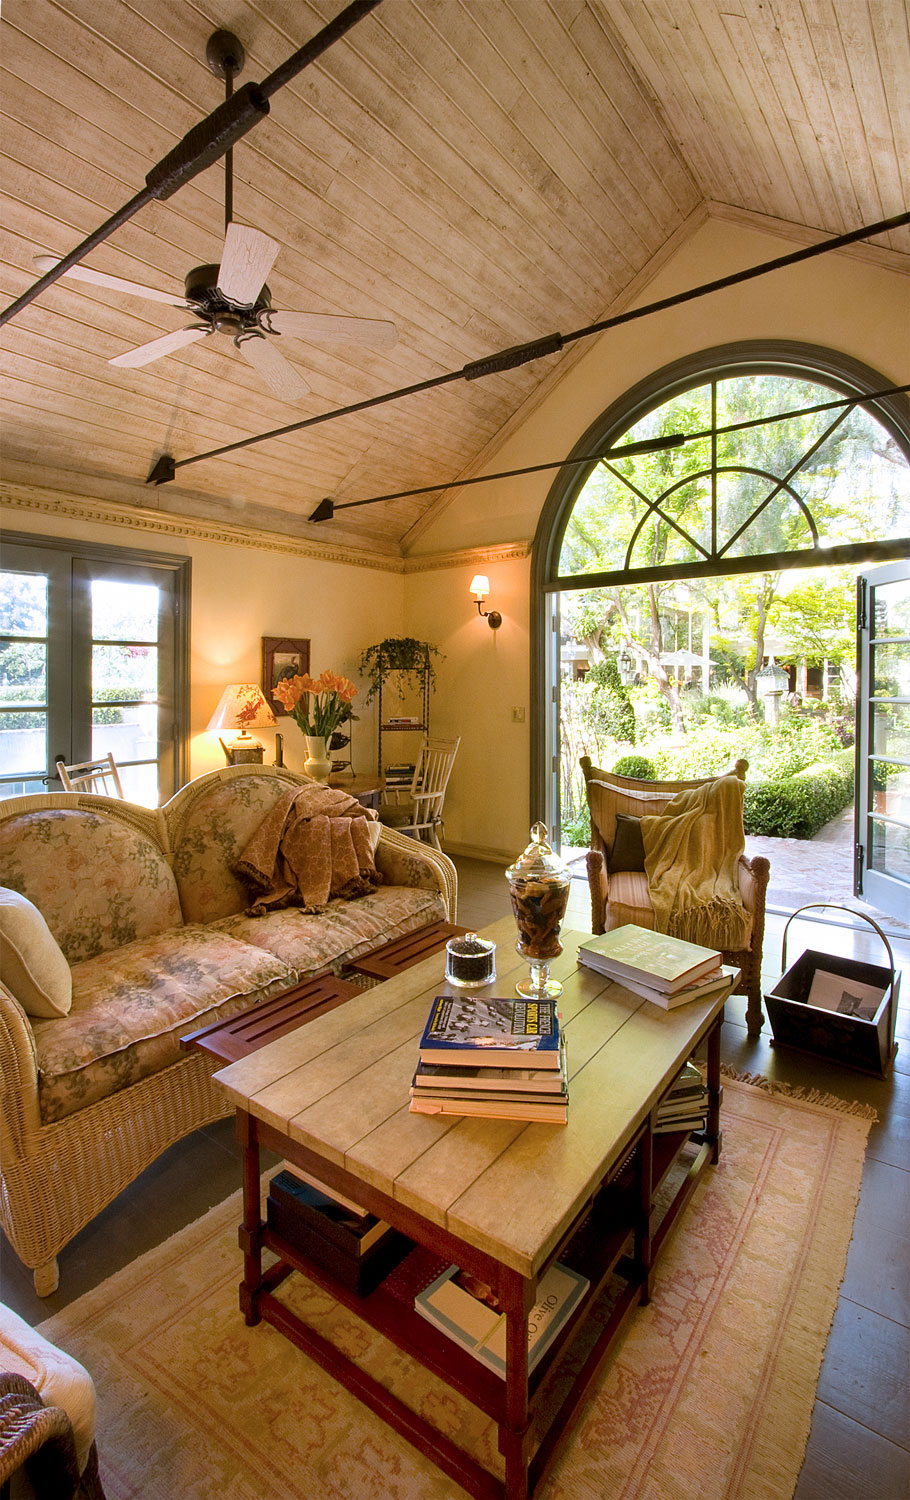 16-pool-house-french-doors-paneled-vaulted-ceiling-gary-drake-general-contractor.jpg